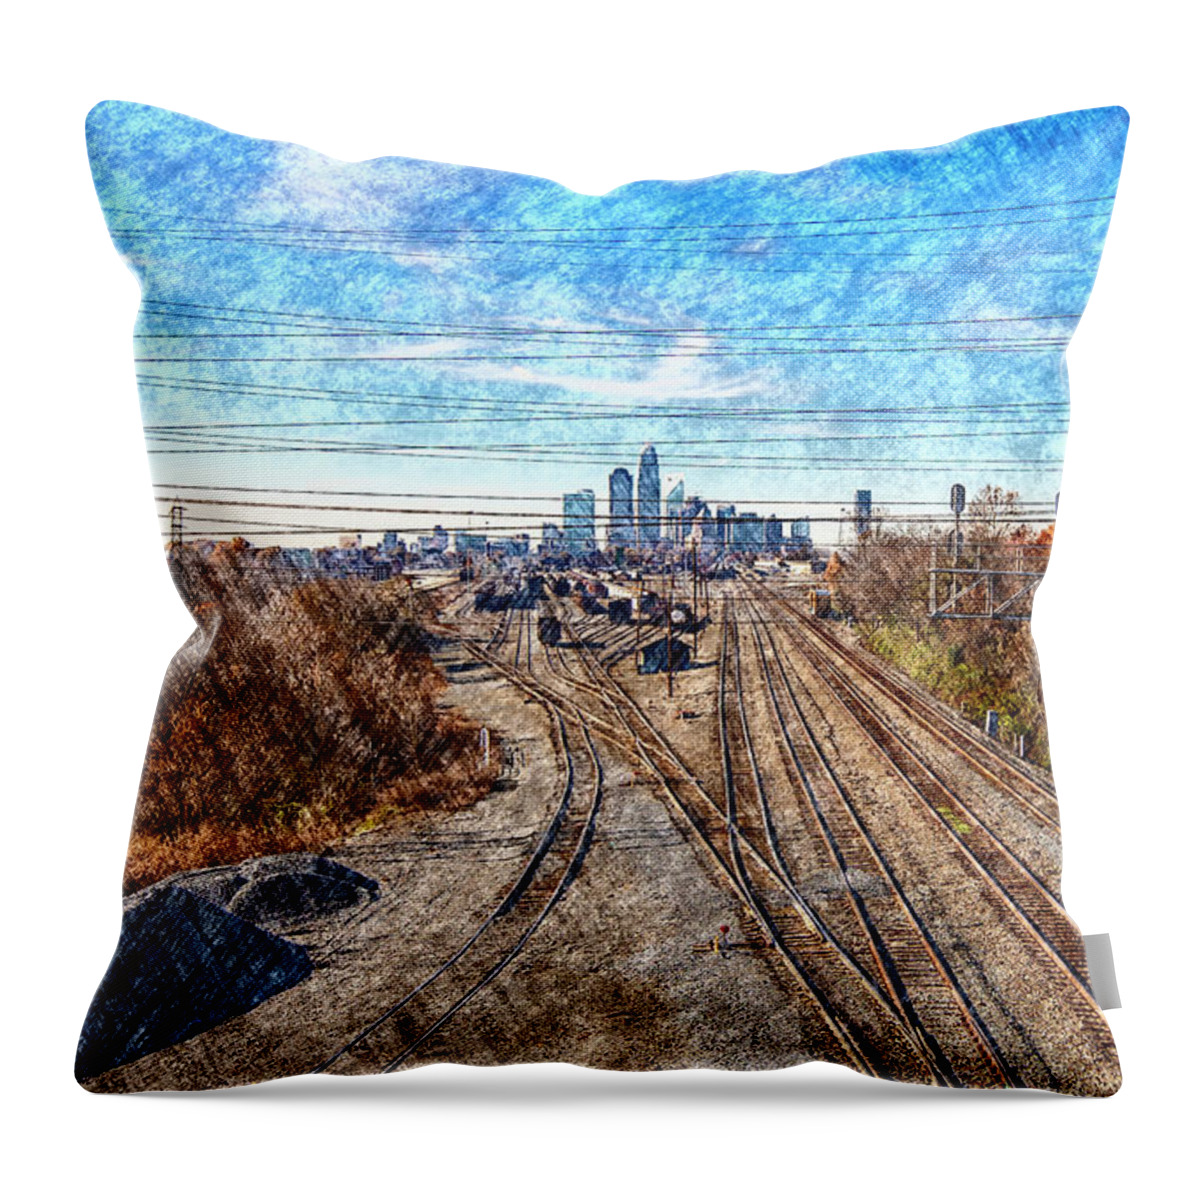 Charlotte-architecture-photography Throw Pillow featuring the digital art Charlotte Skyline from Matheson Bridge by SnapHappy Photos